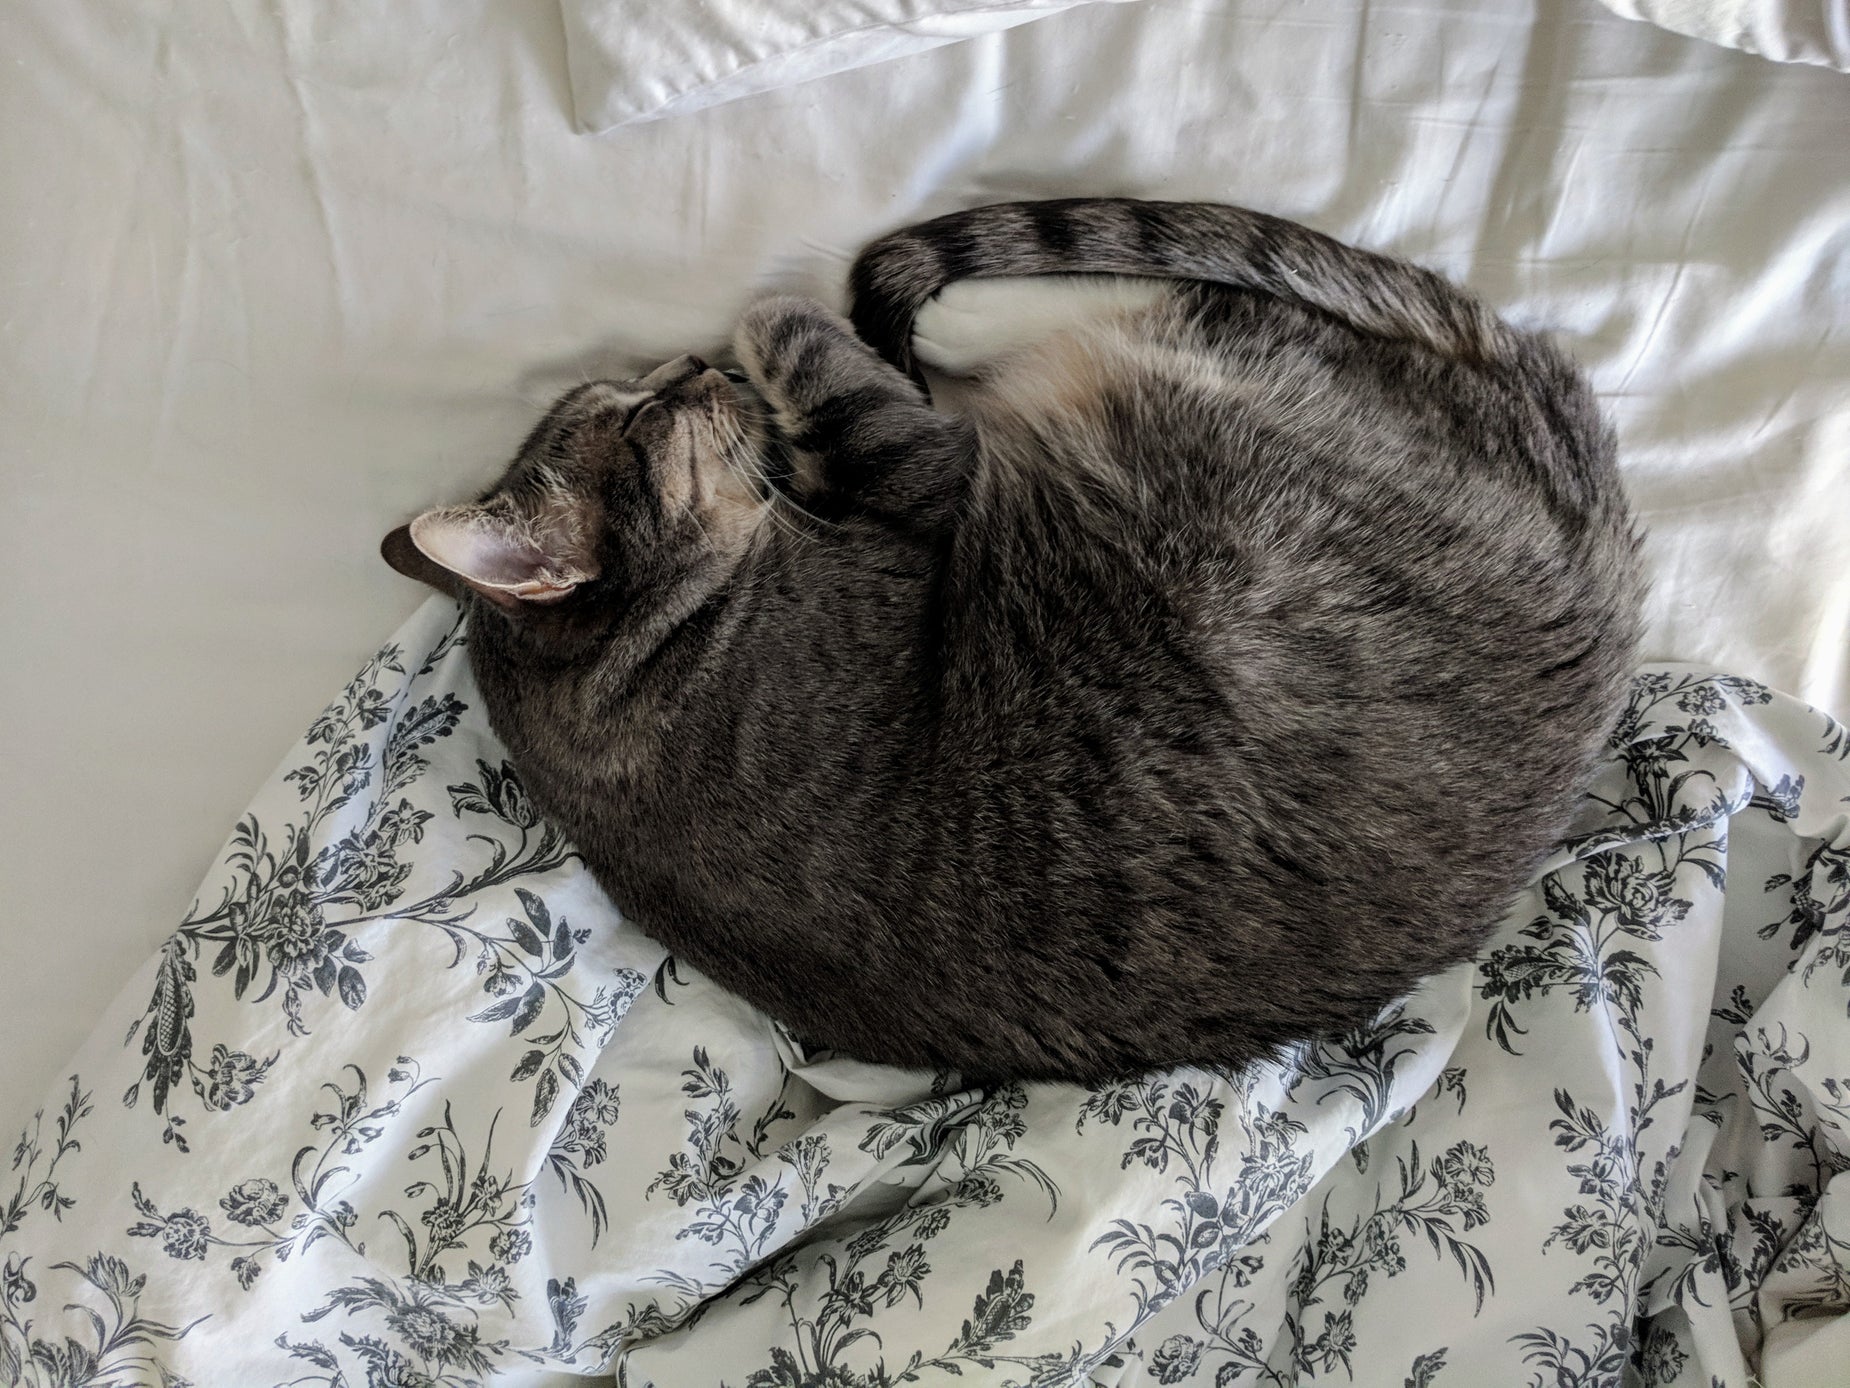 a cat curled up and sleeping on a bed